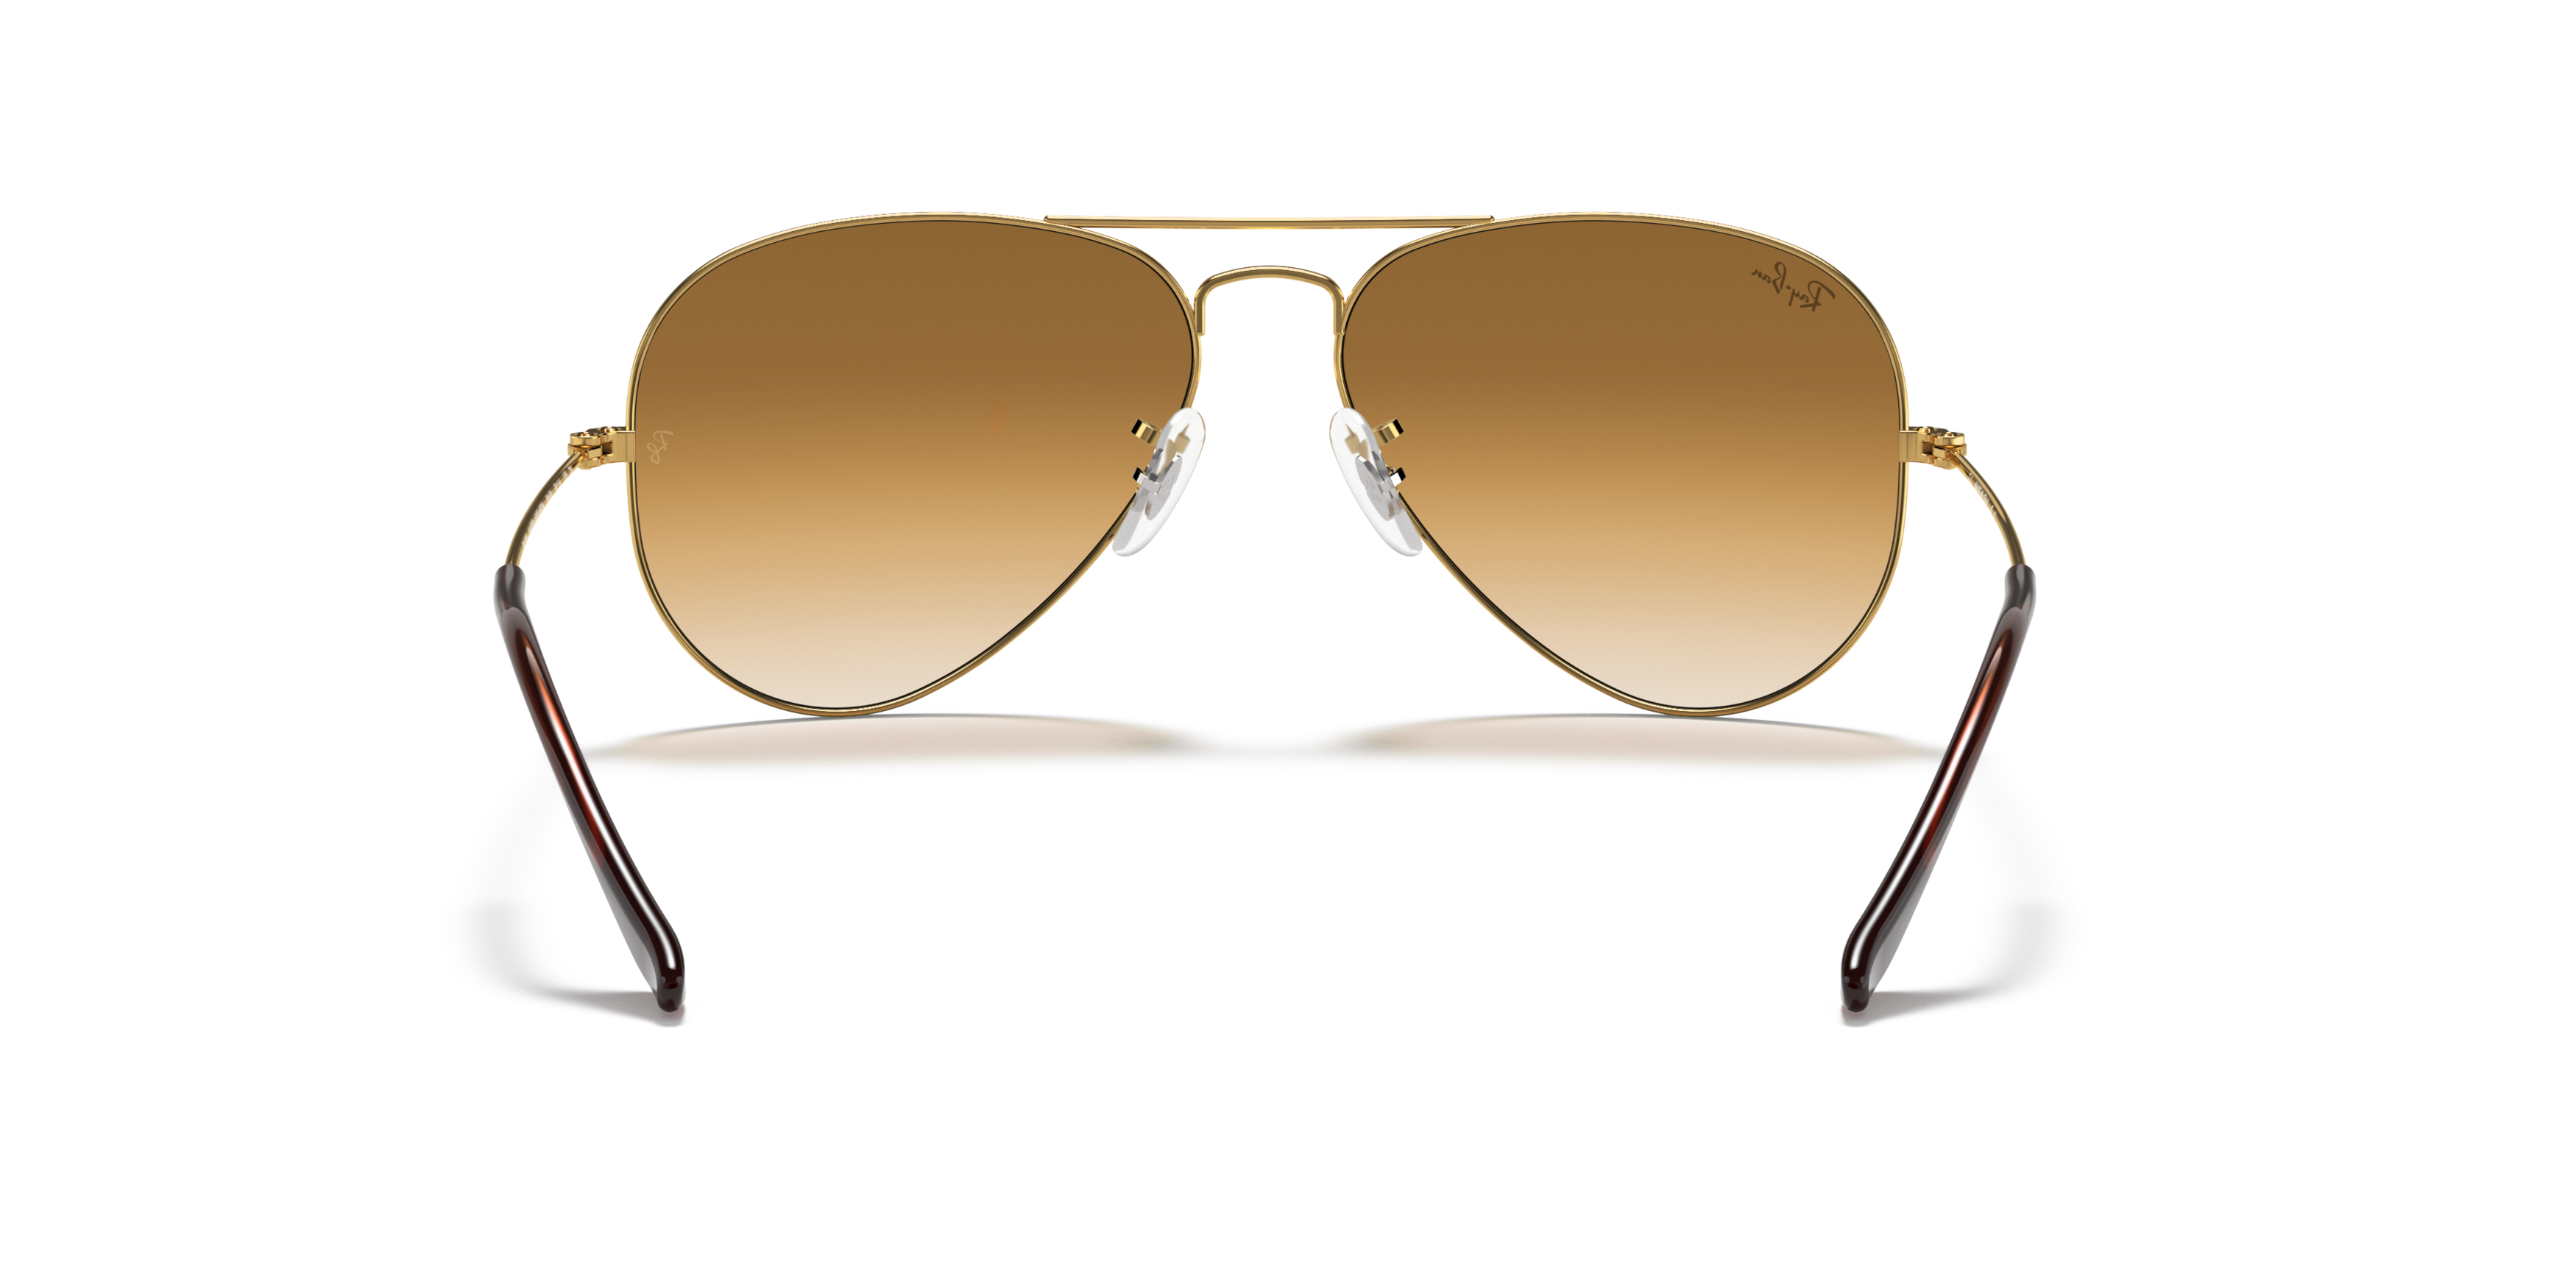 [products.image.detail02] Ray-Ban Aviator 0RB3025 001/51